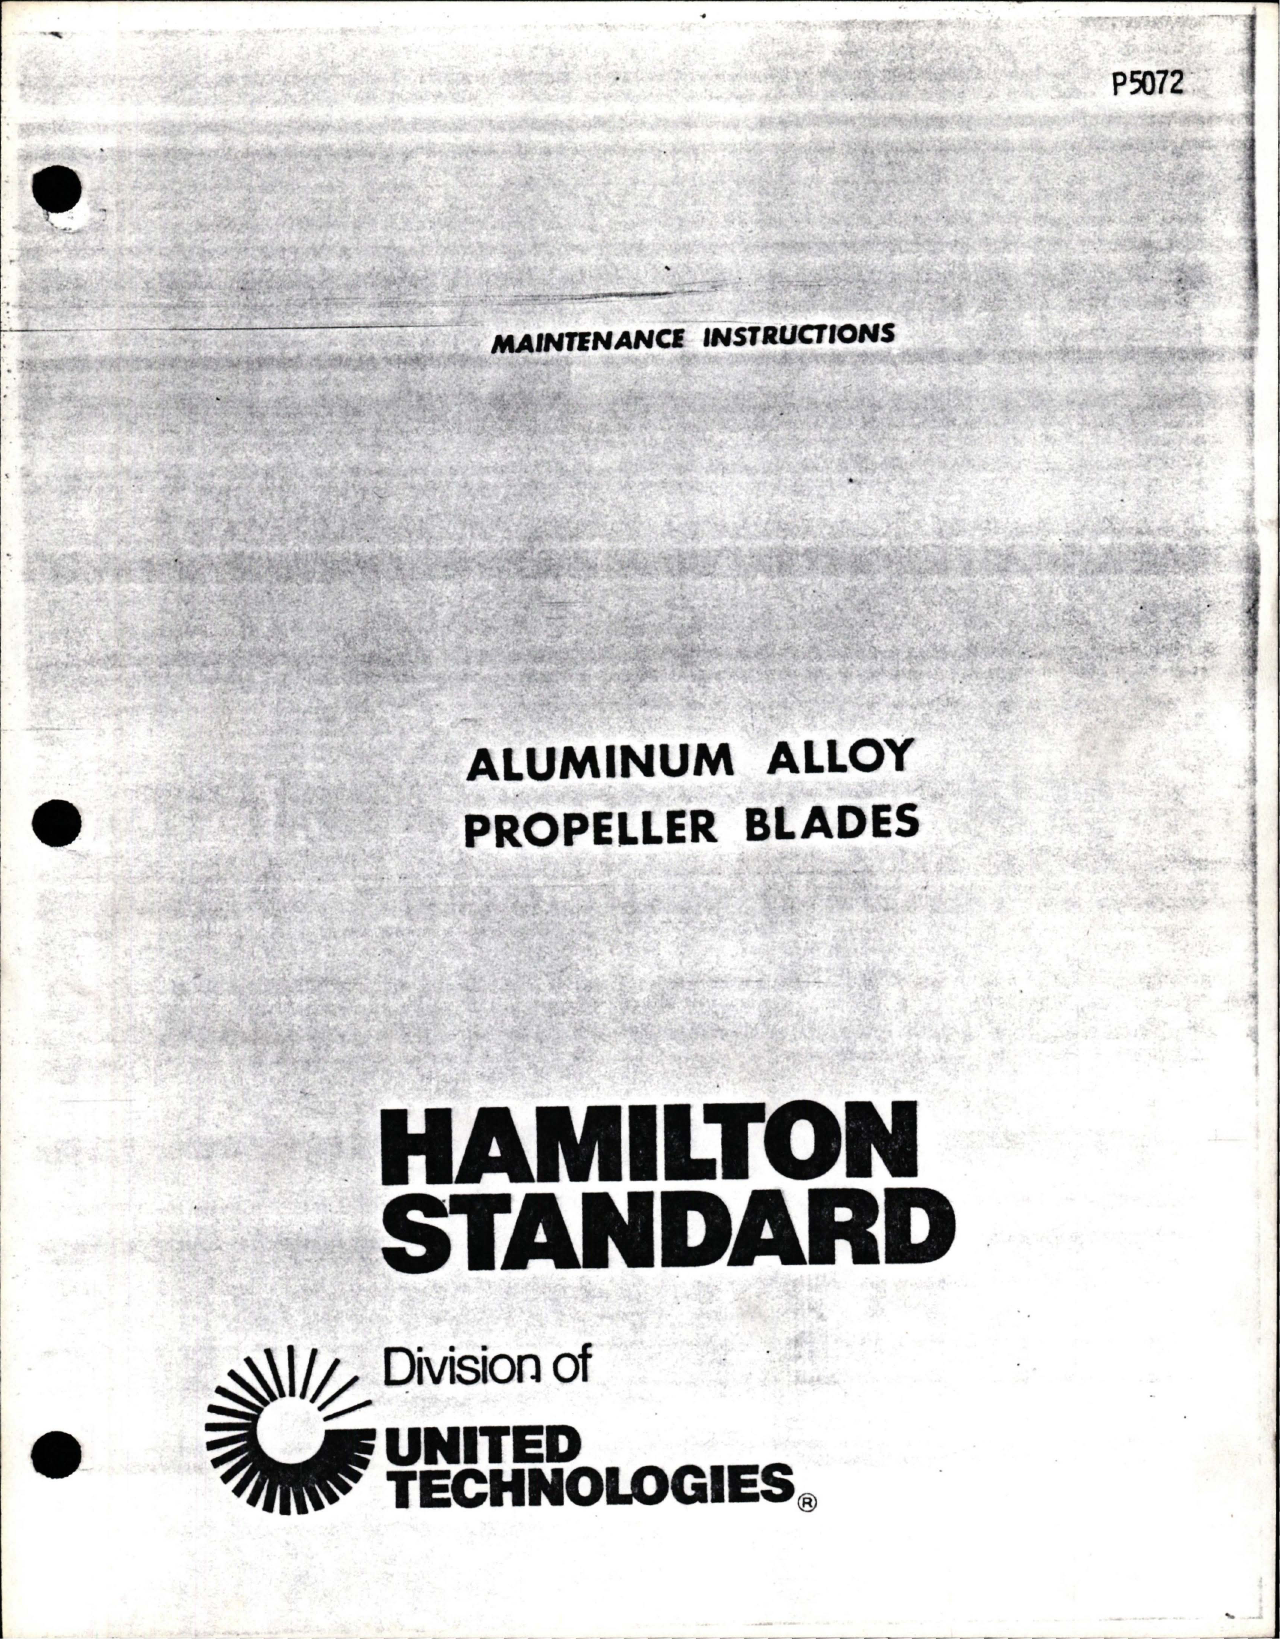 Sample page 1 from AirCorps Library document: Maintenance Instructions for Aluminum Alloy Propeller Blades